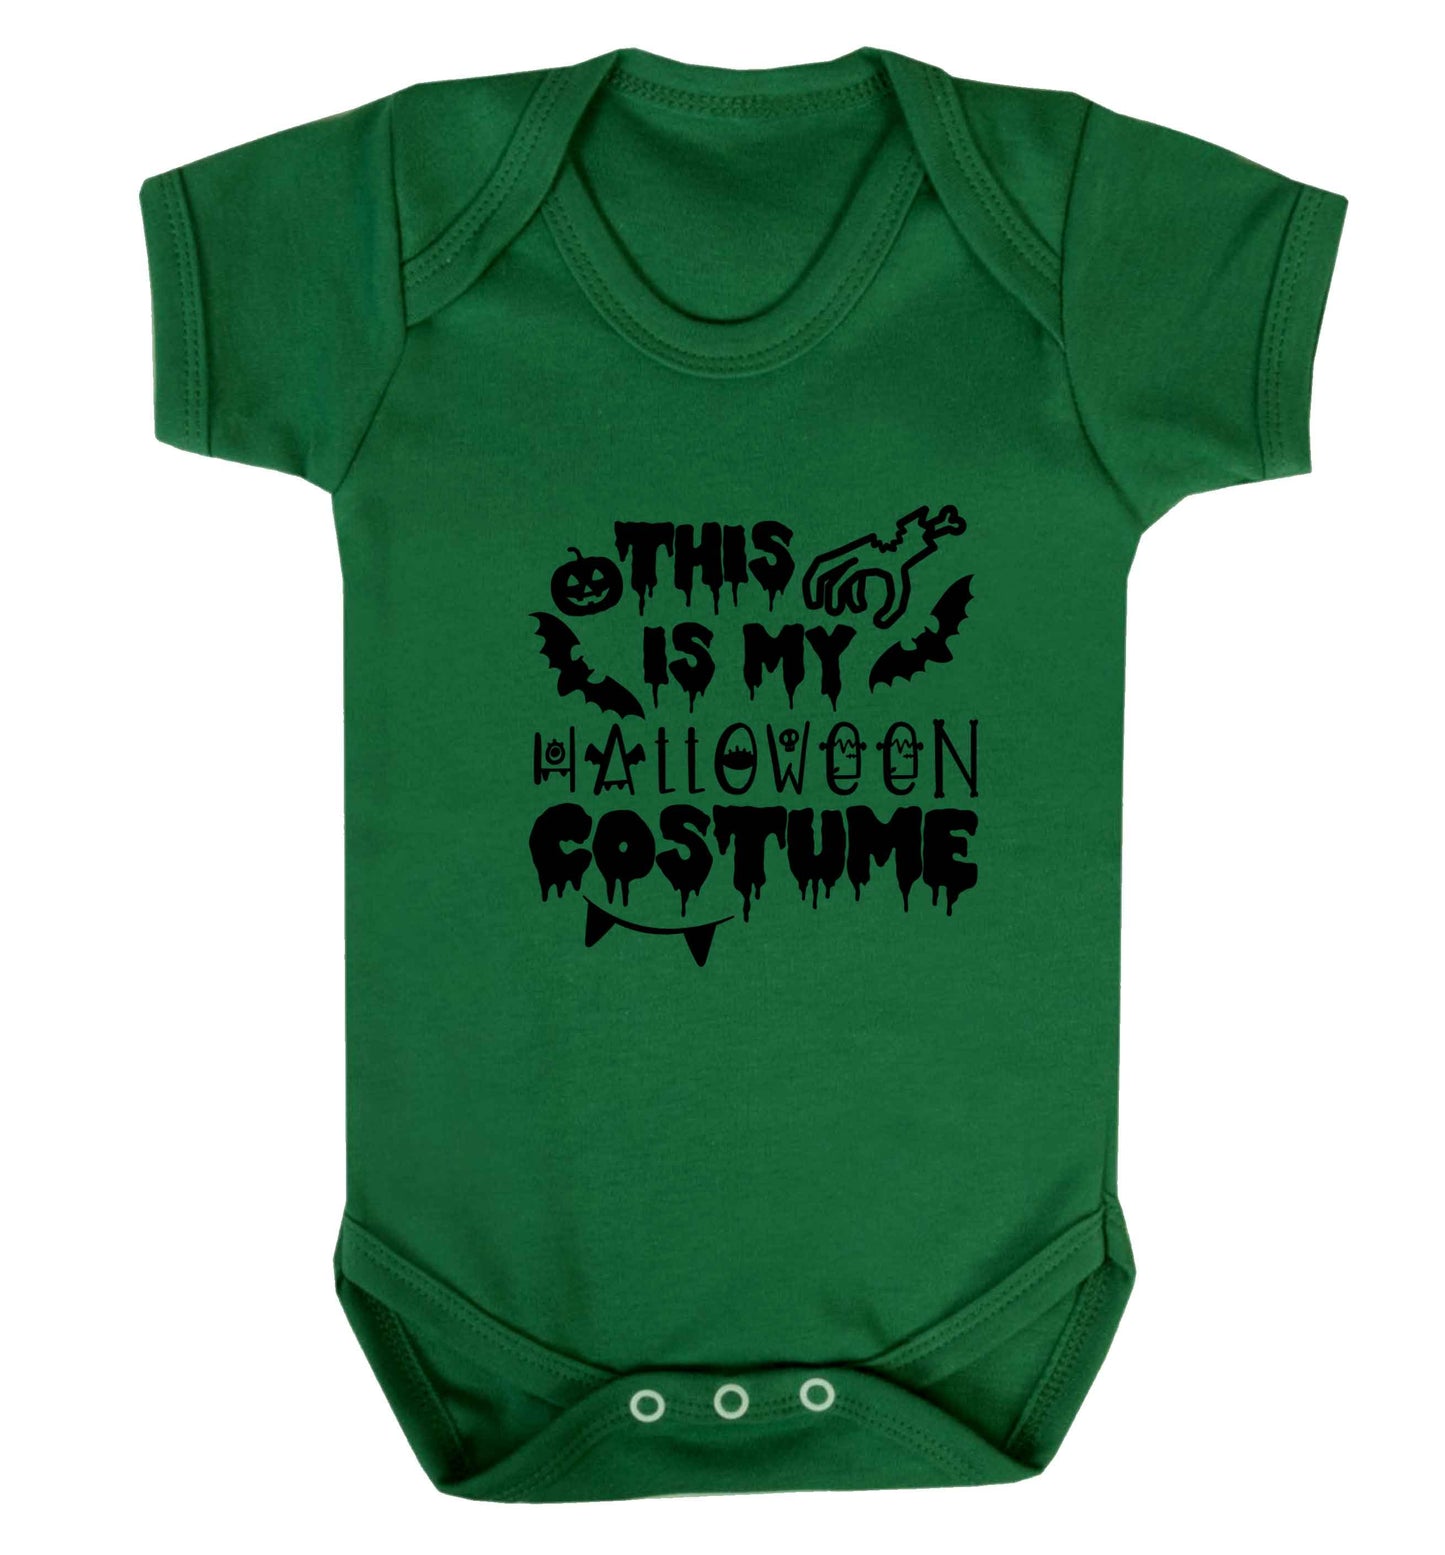 This is my halloween costume baby vest green 18-24 months